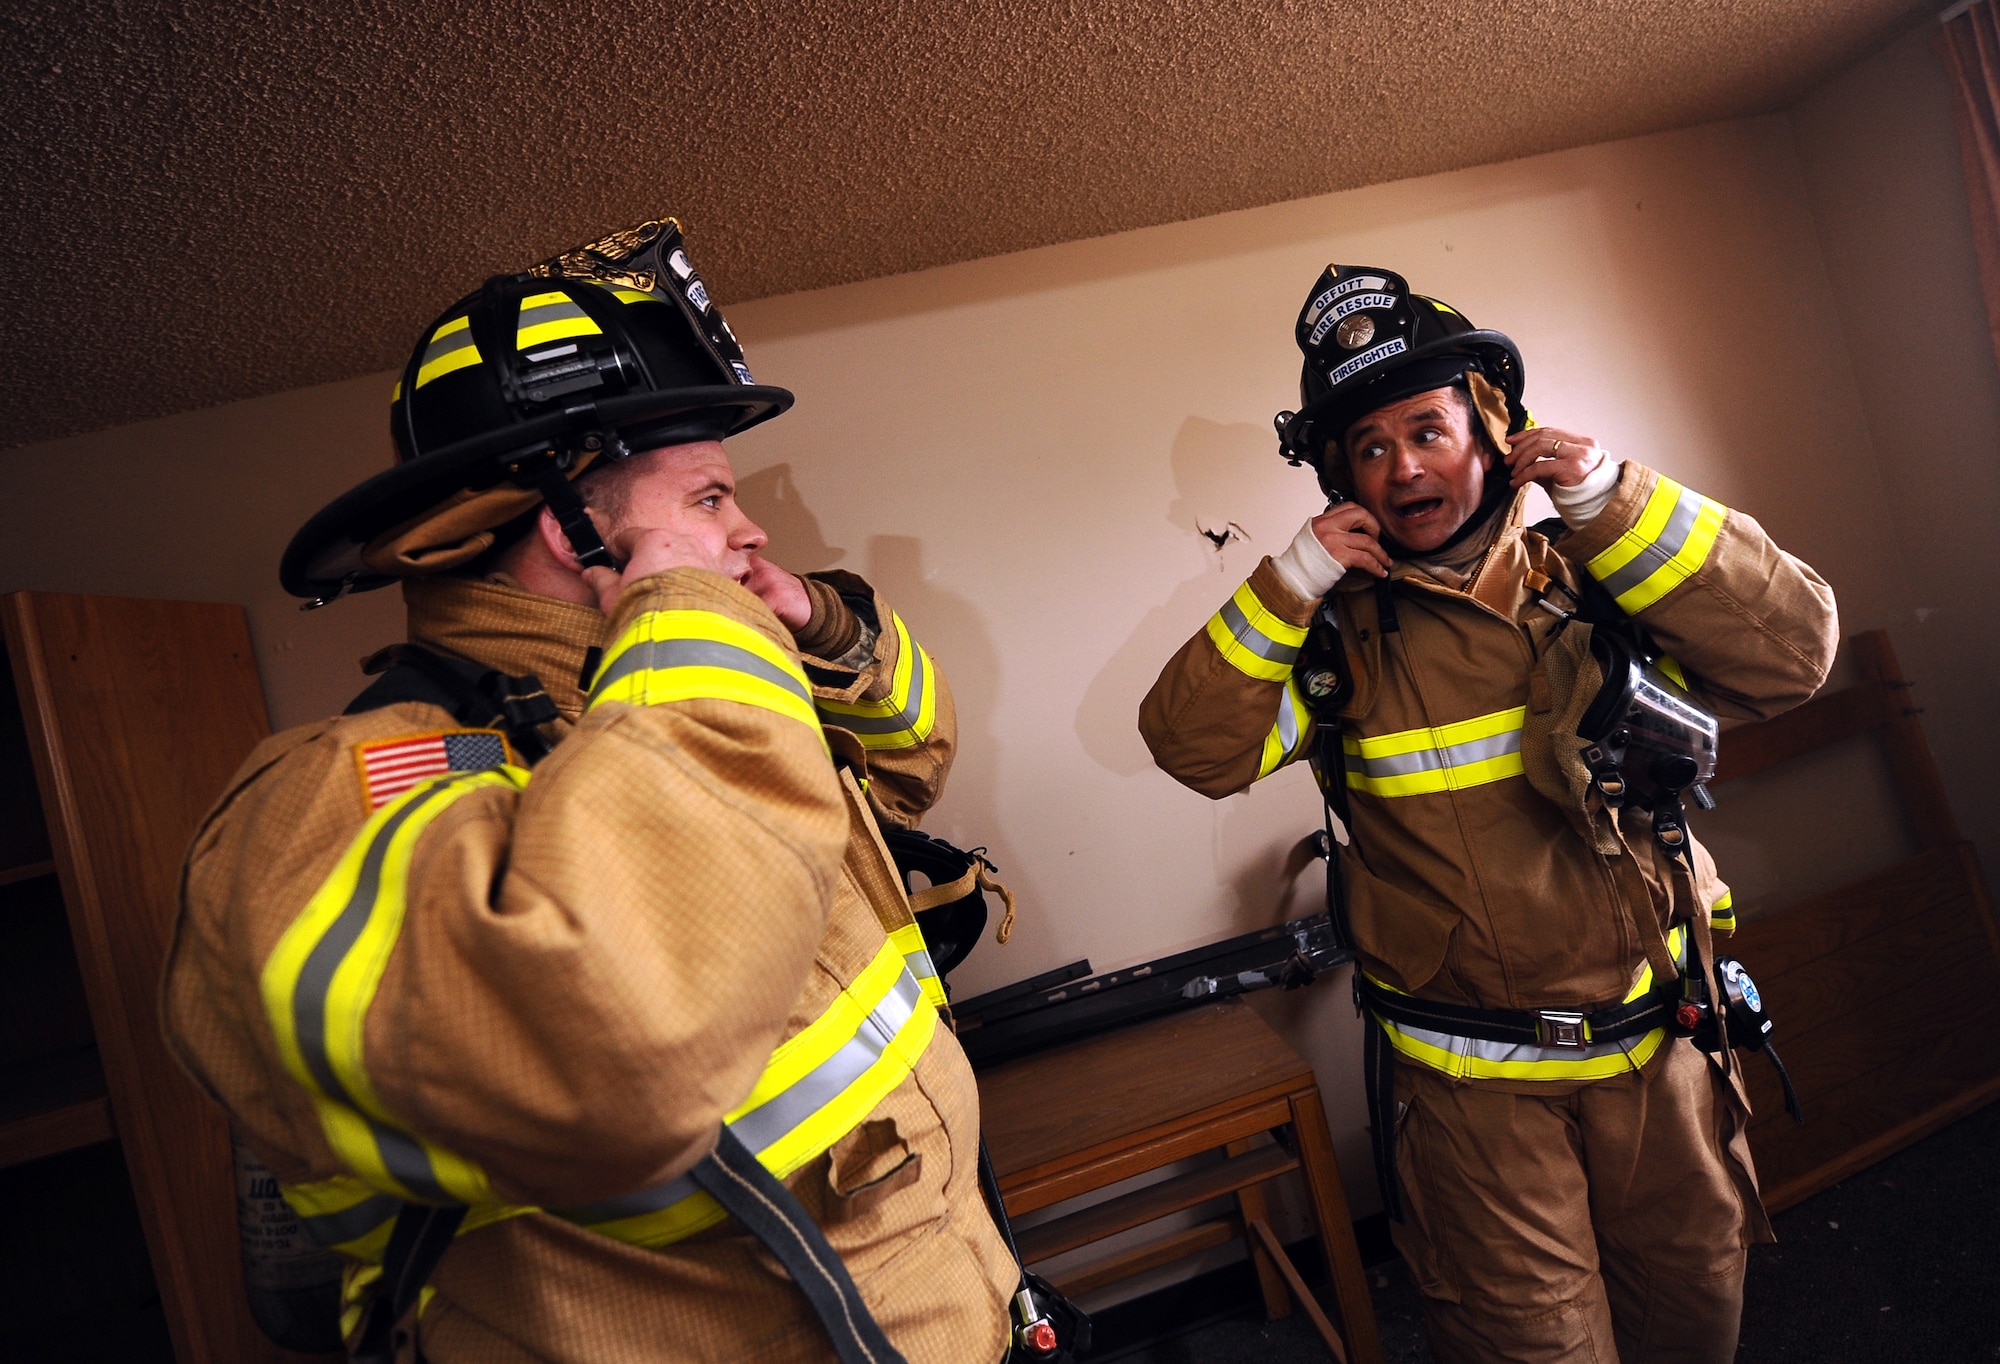 Lucas Lechtenberg, Offutt Air Force Base firefighter, removes his protective gear as does U.S. Air Force Brig. Gen. Donald Bacon, following a fast paced training session that involved storming McCoy Hall to find "dummies" representing survivors in the room at Offutt Air Force Base, Neb., March 7.  Bacon spent 24 hours with Offutt firefighters, training, eating and sleeping in the bunks to gain perspective for how their life is spent on base and in the firehouse.  (U.S. Air Force photo by Josh Plueger/Released).